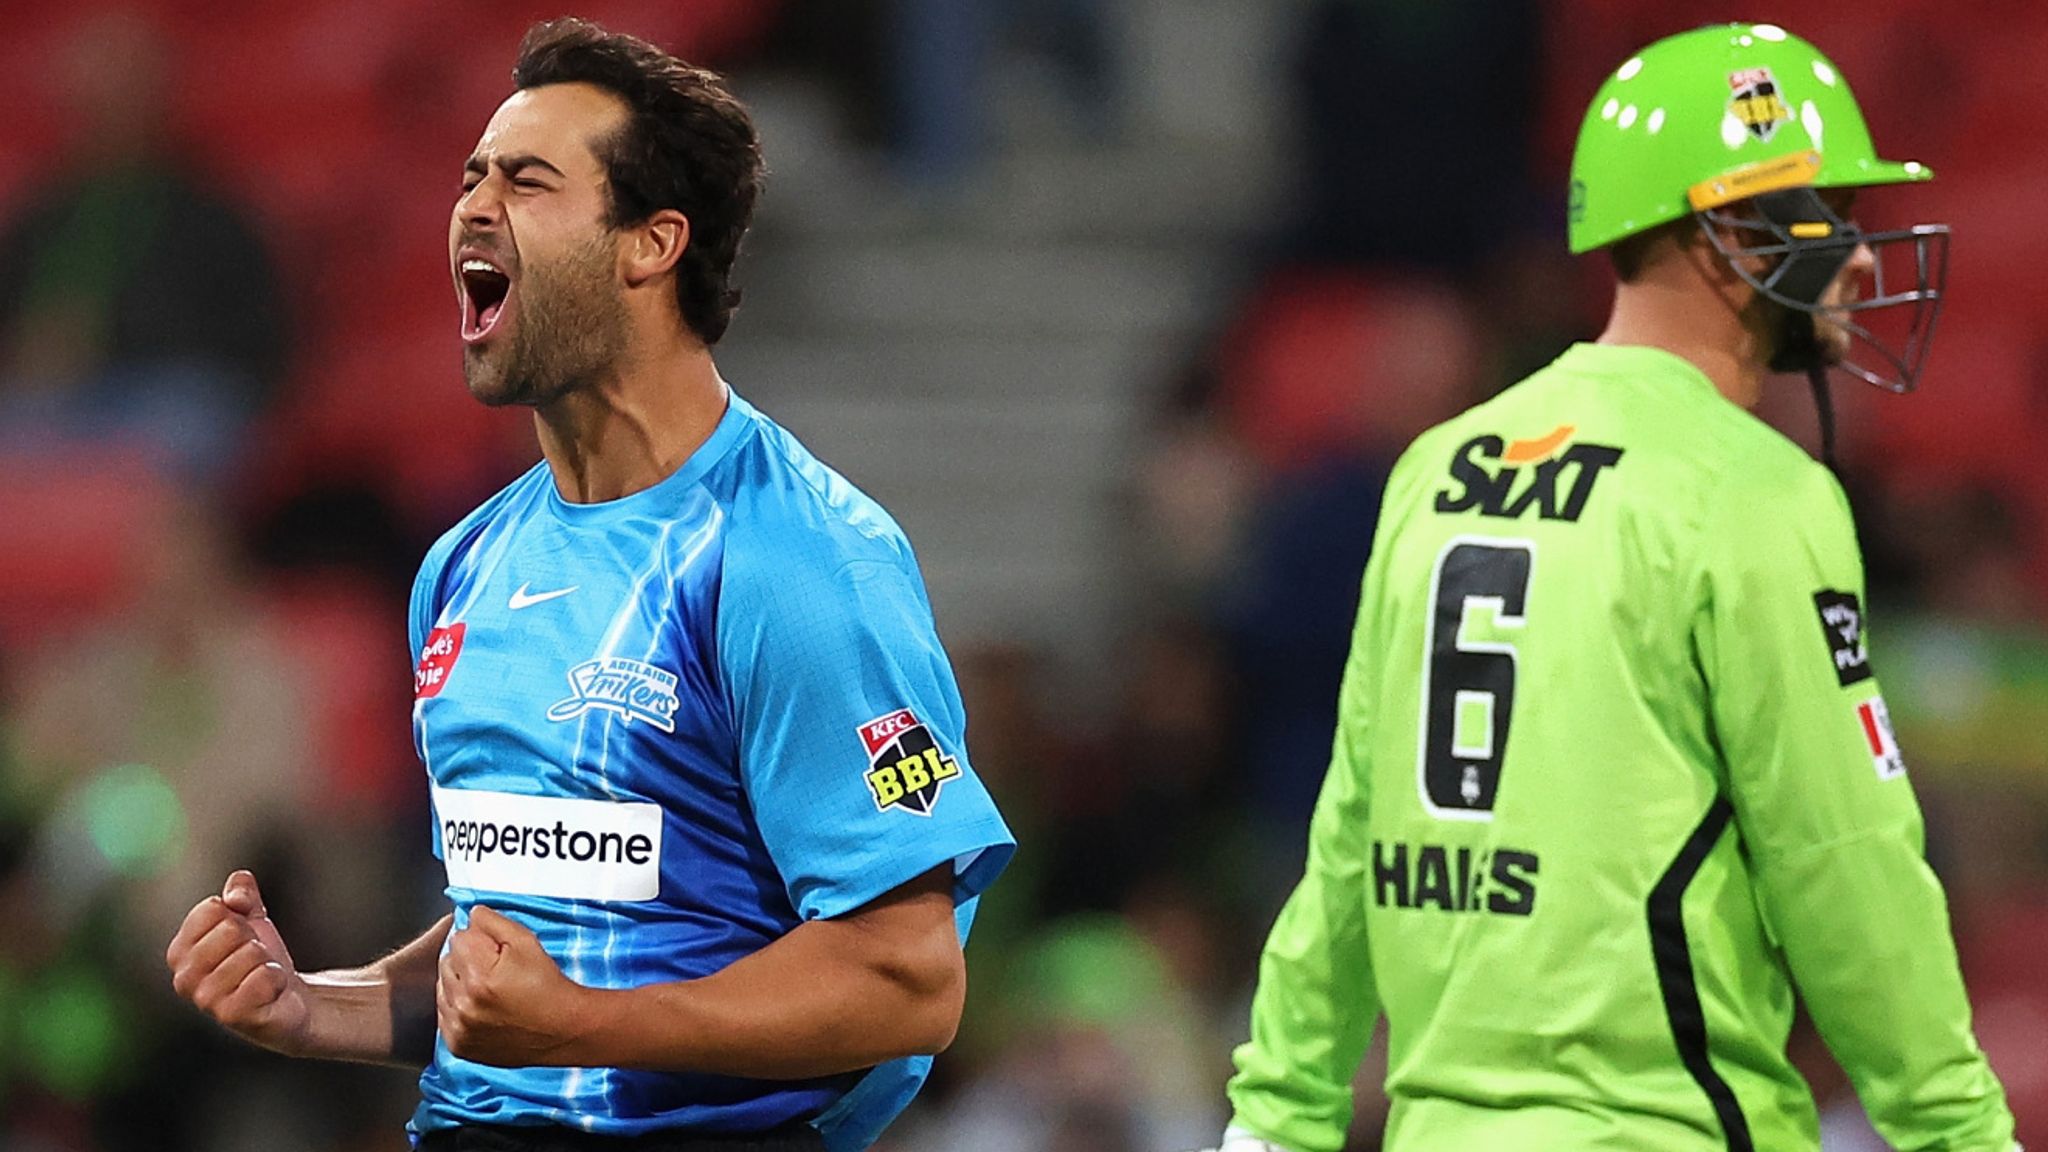 15 all out! Sydney Thunder bowled out in just 35 deliveries by Adelaide Strikers in Big Bash League Cricket News Sky Sports